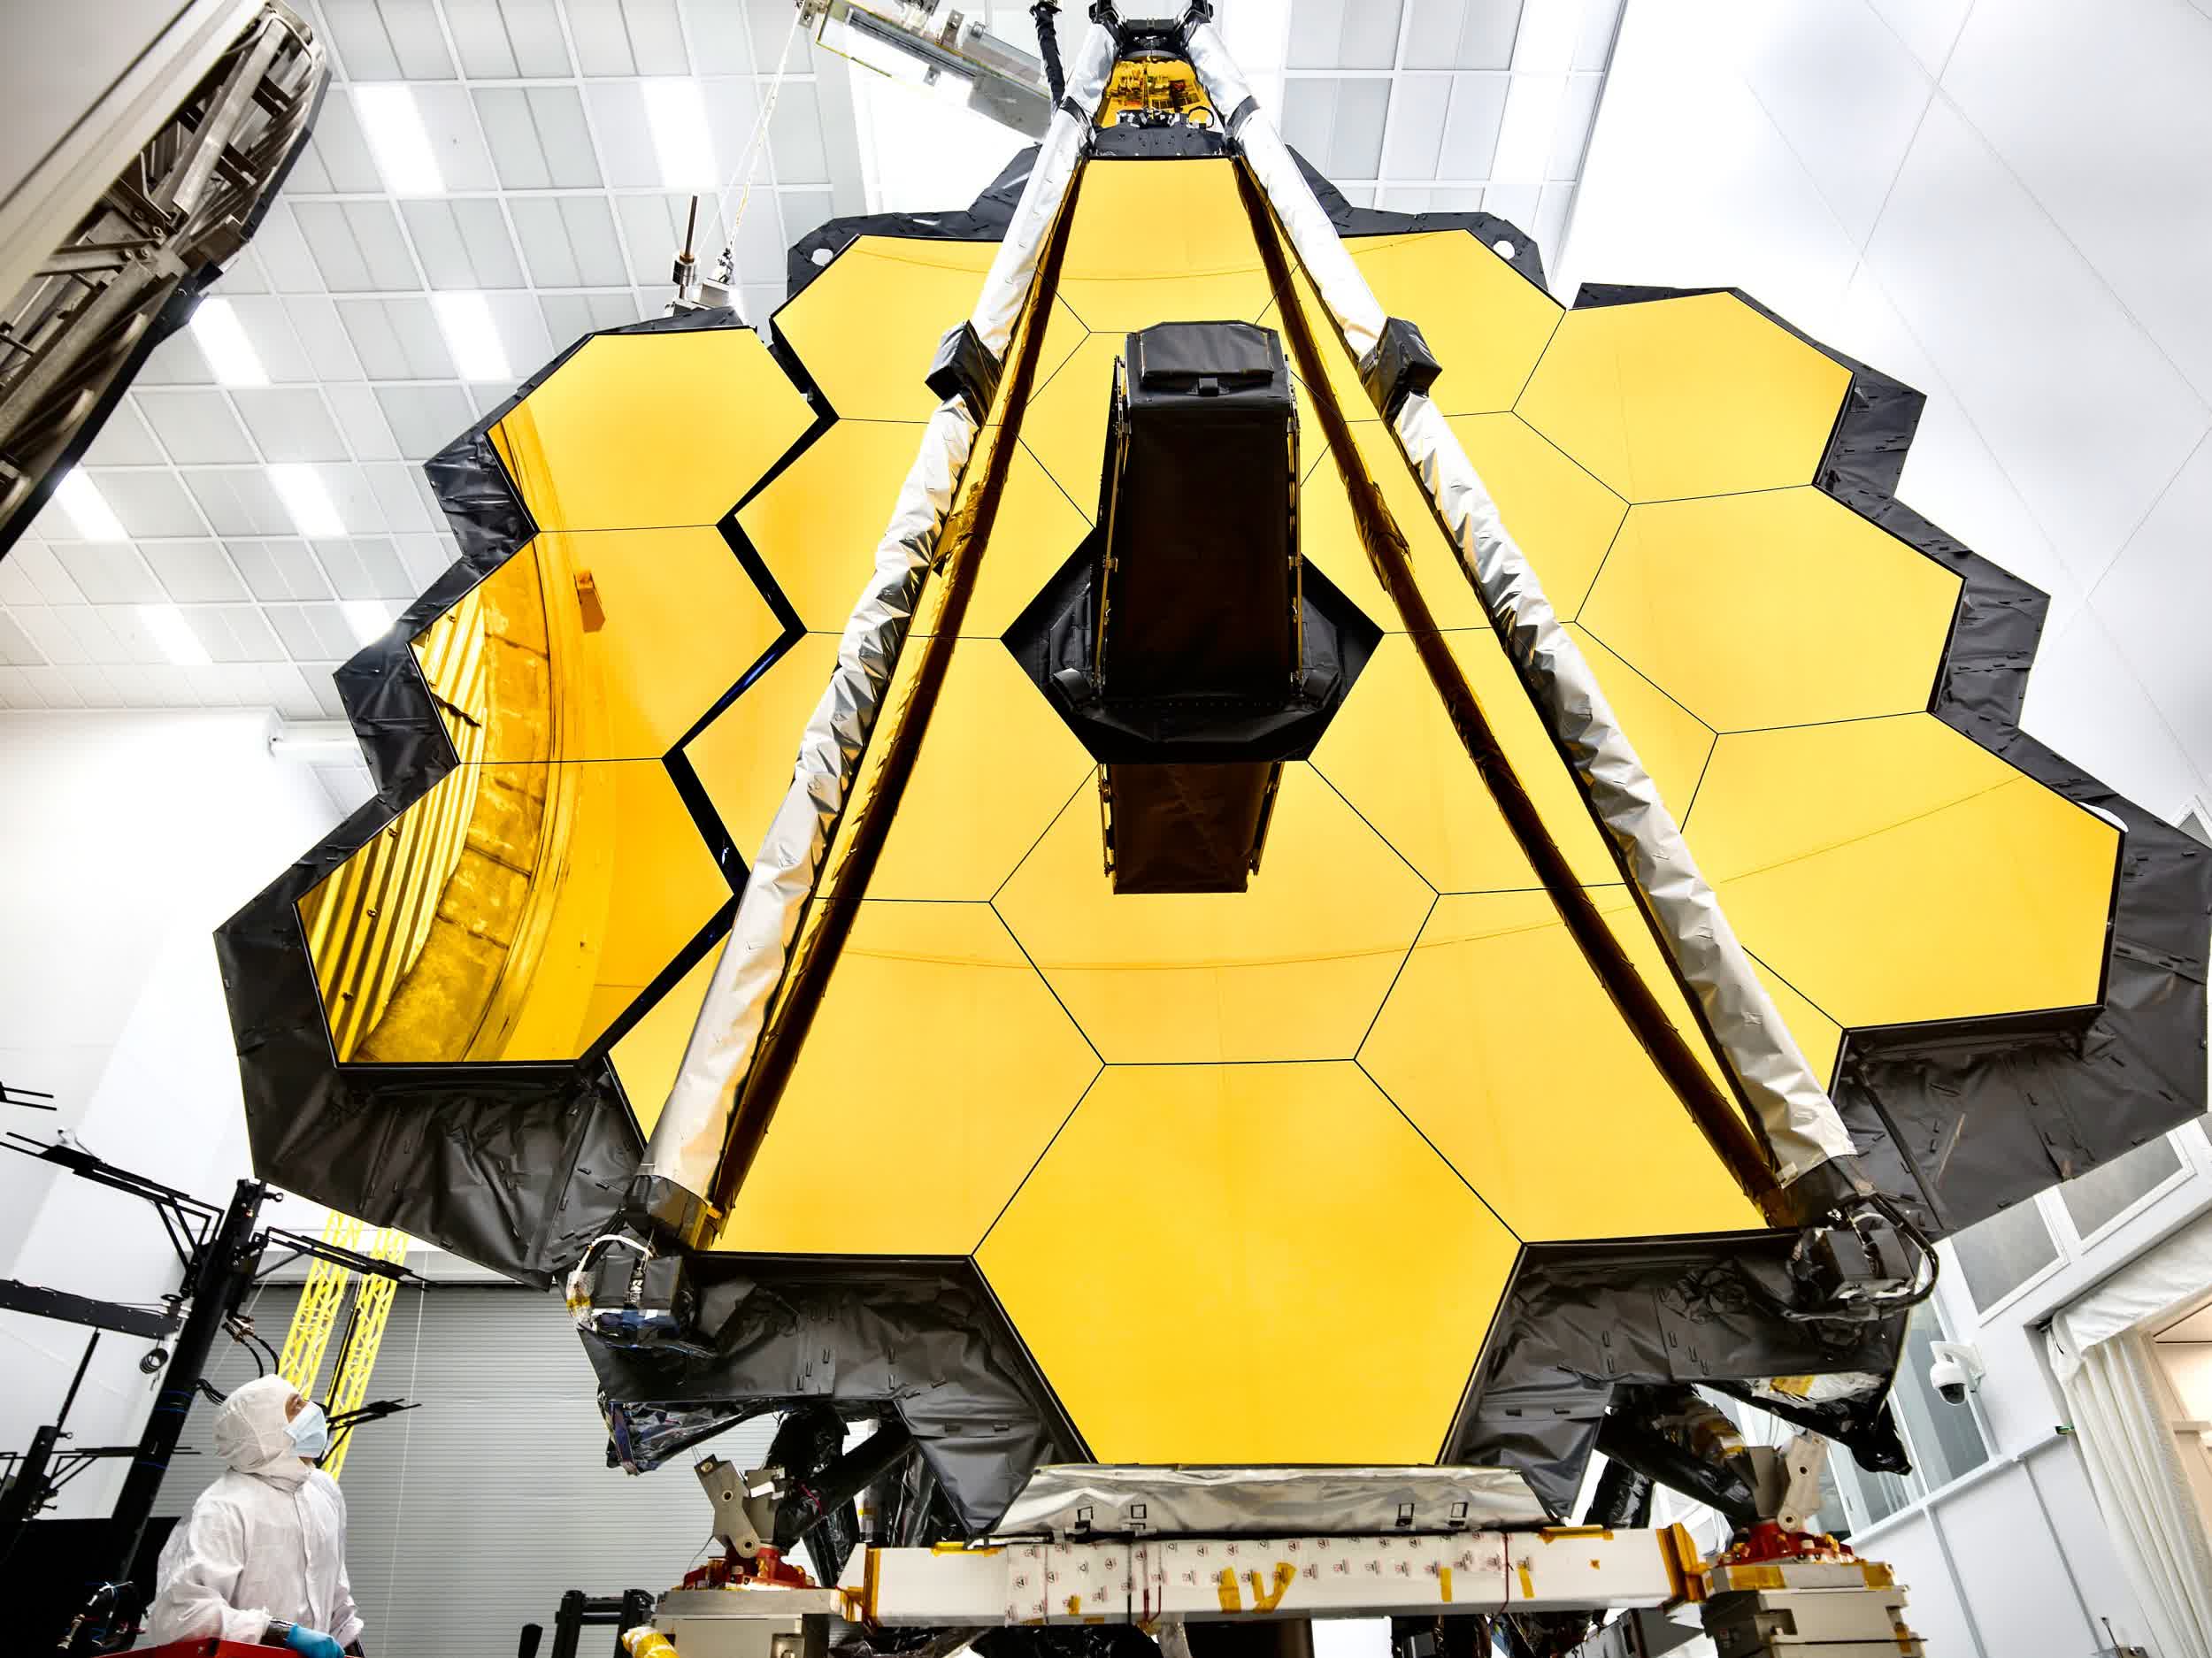 NASA sets a new launch date of December 18 for the James Webb Space Telescope